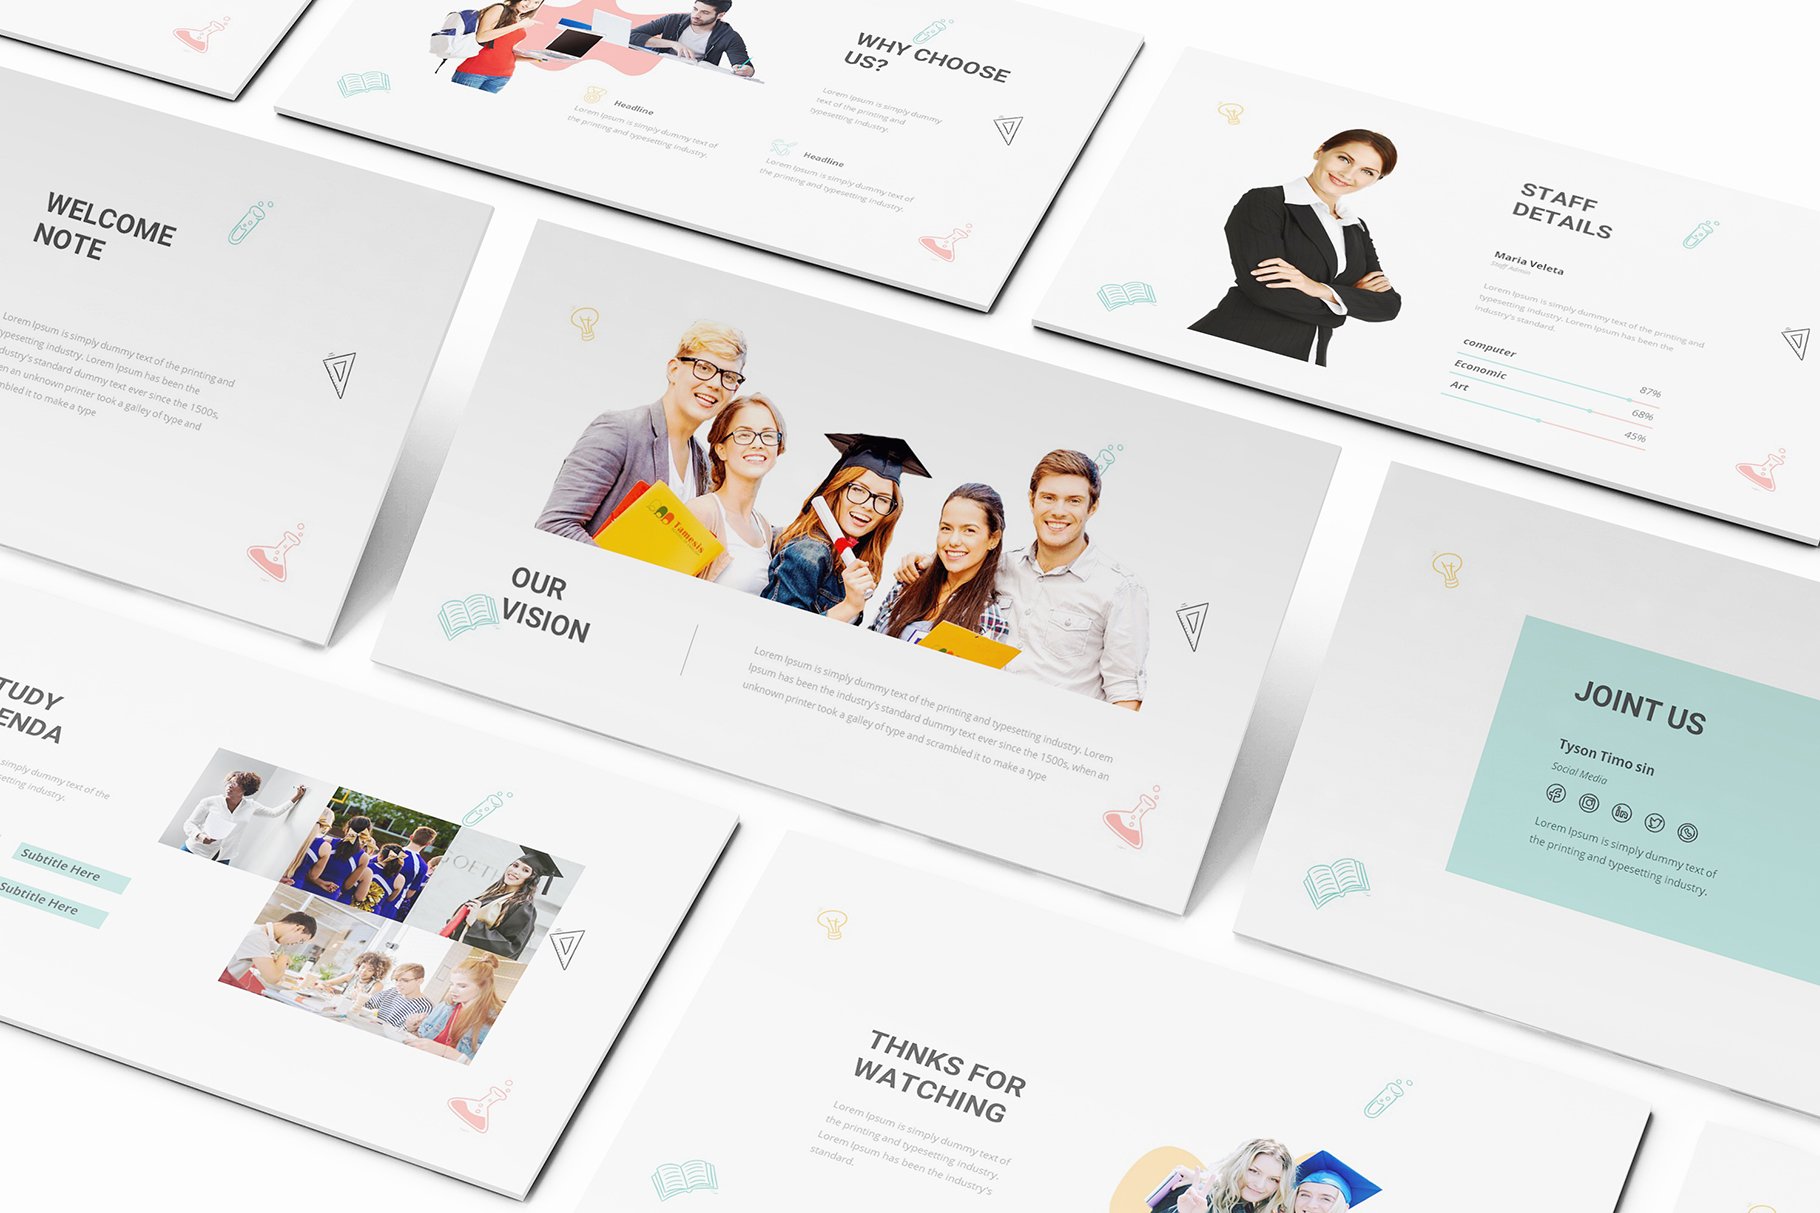 Use this creative template for your presentation.